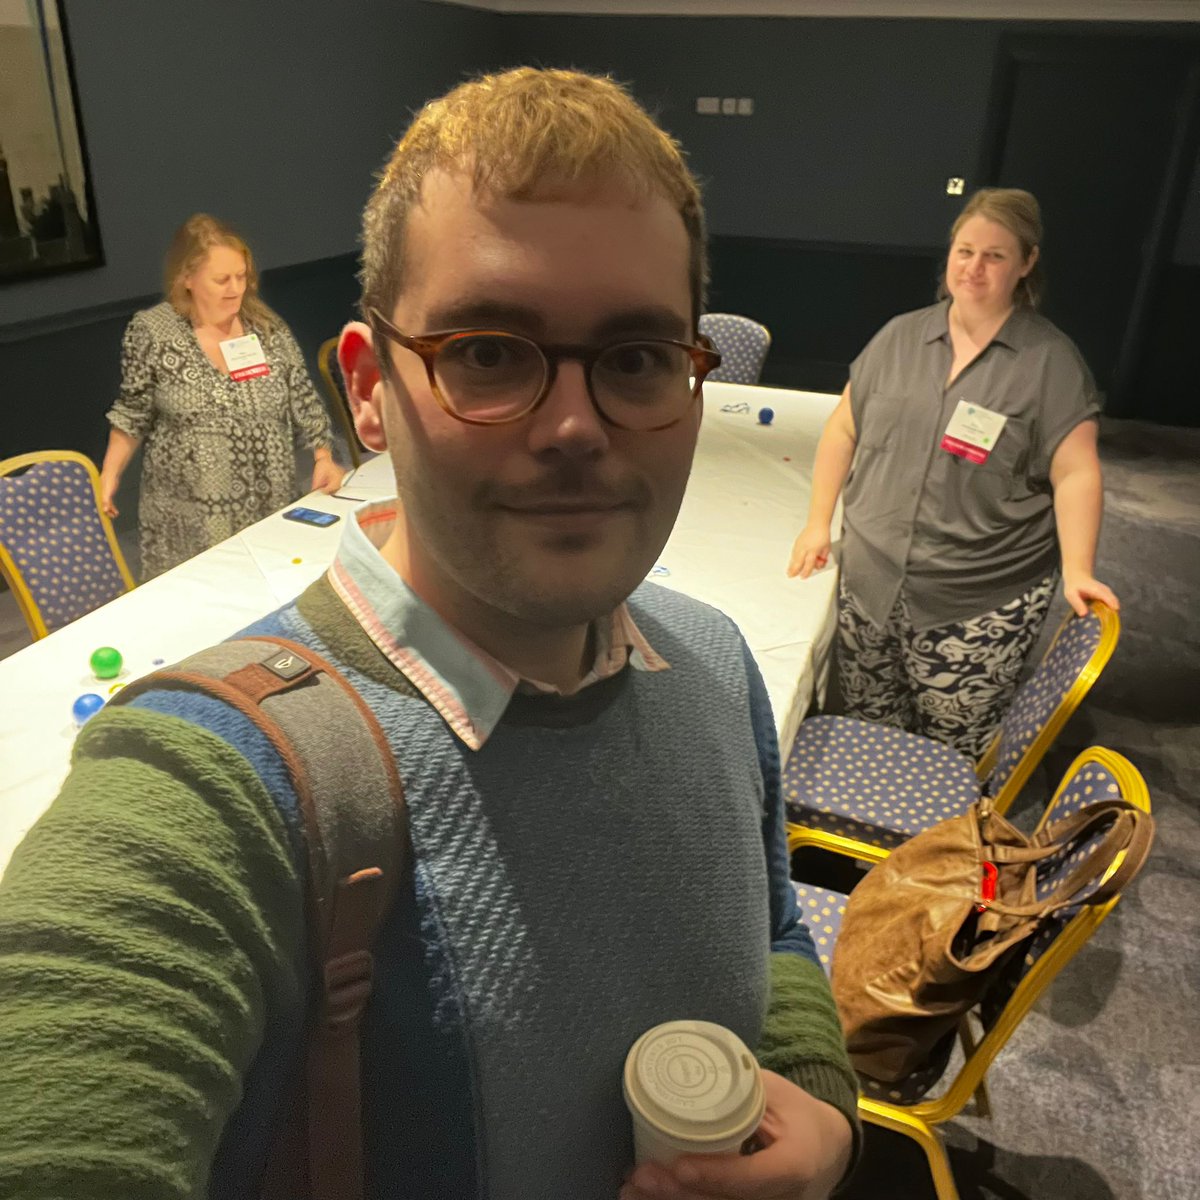 Thank you @connectAPS for providing a Quiet Room at #APS2024UK - it's so helpful to have a space for a sensory break (although it's a bit difficult to locate). Those three autistics in the picture approve! @AutisticDoctor @Autistic_Doc